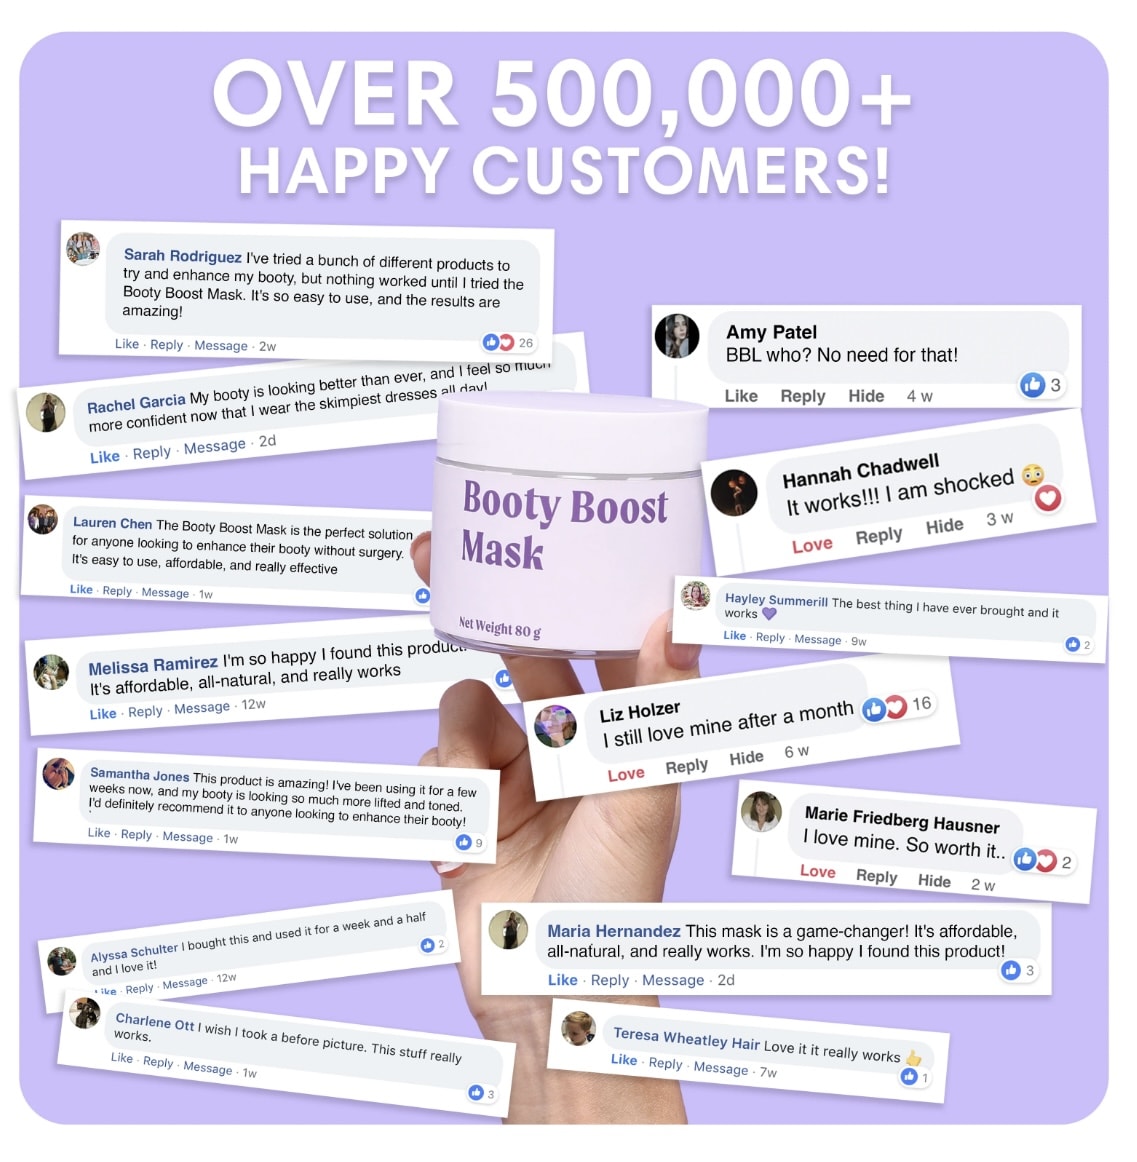 bleame website claim that they have over 500,000 happy customers for their booty boost mask. 